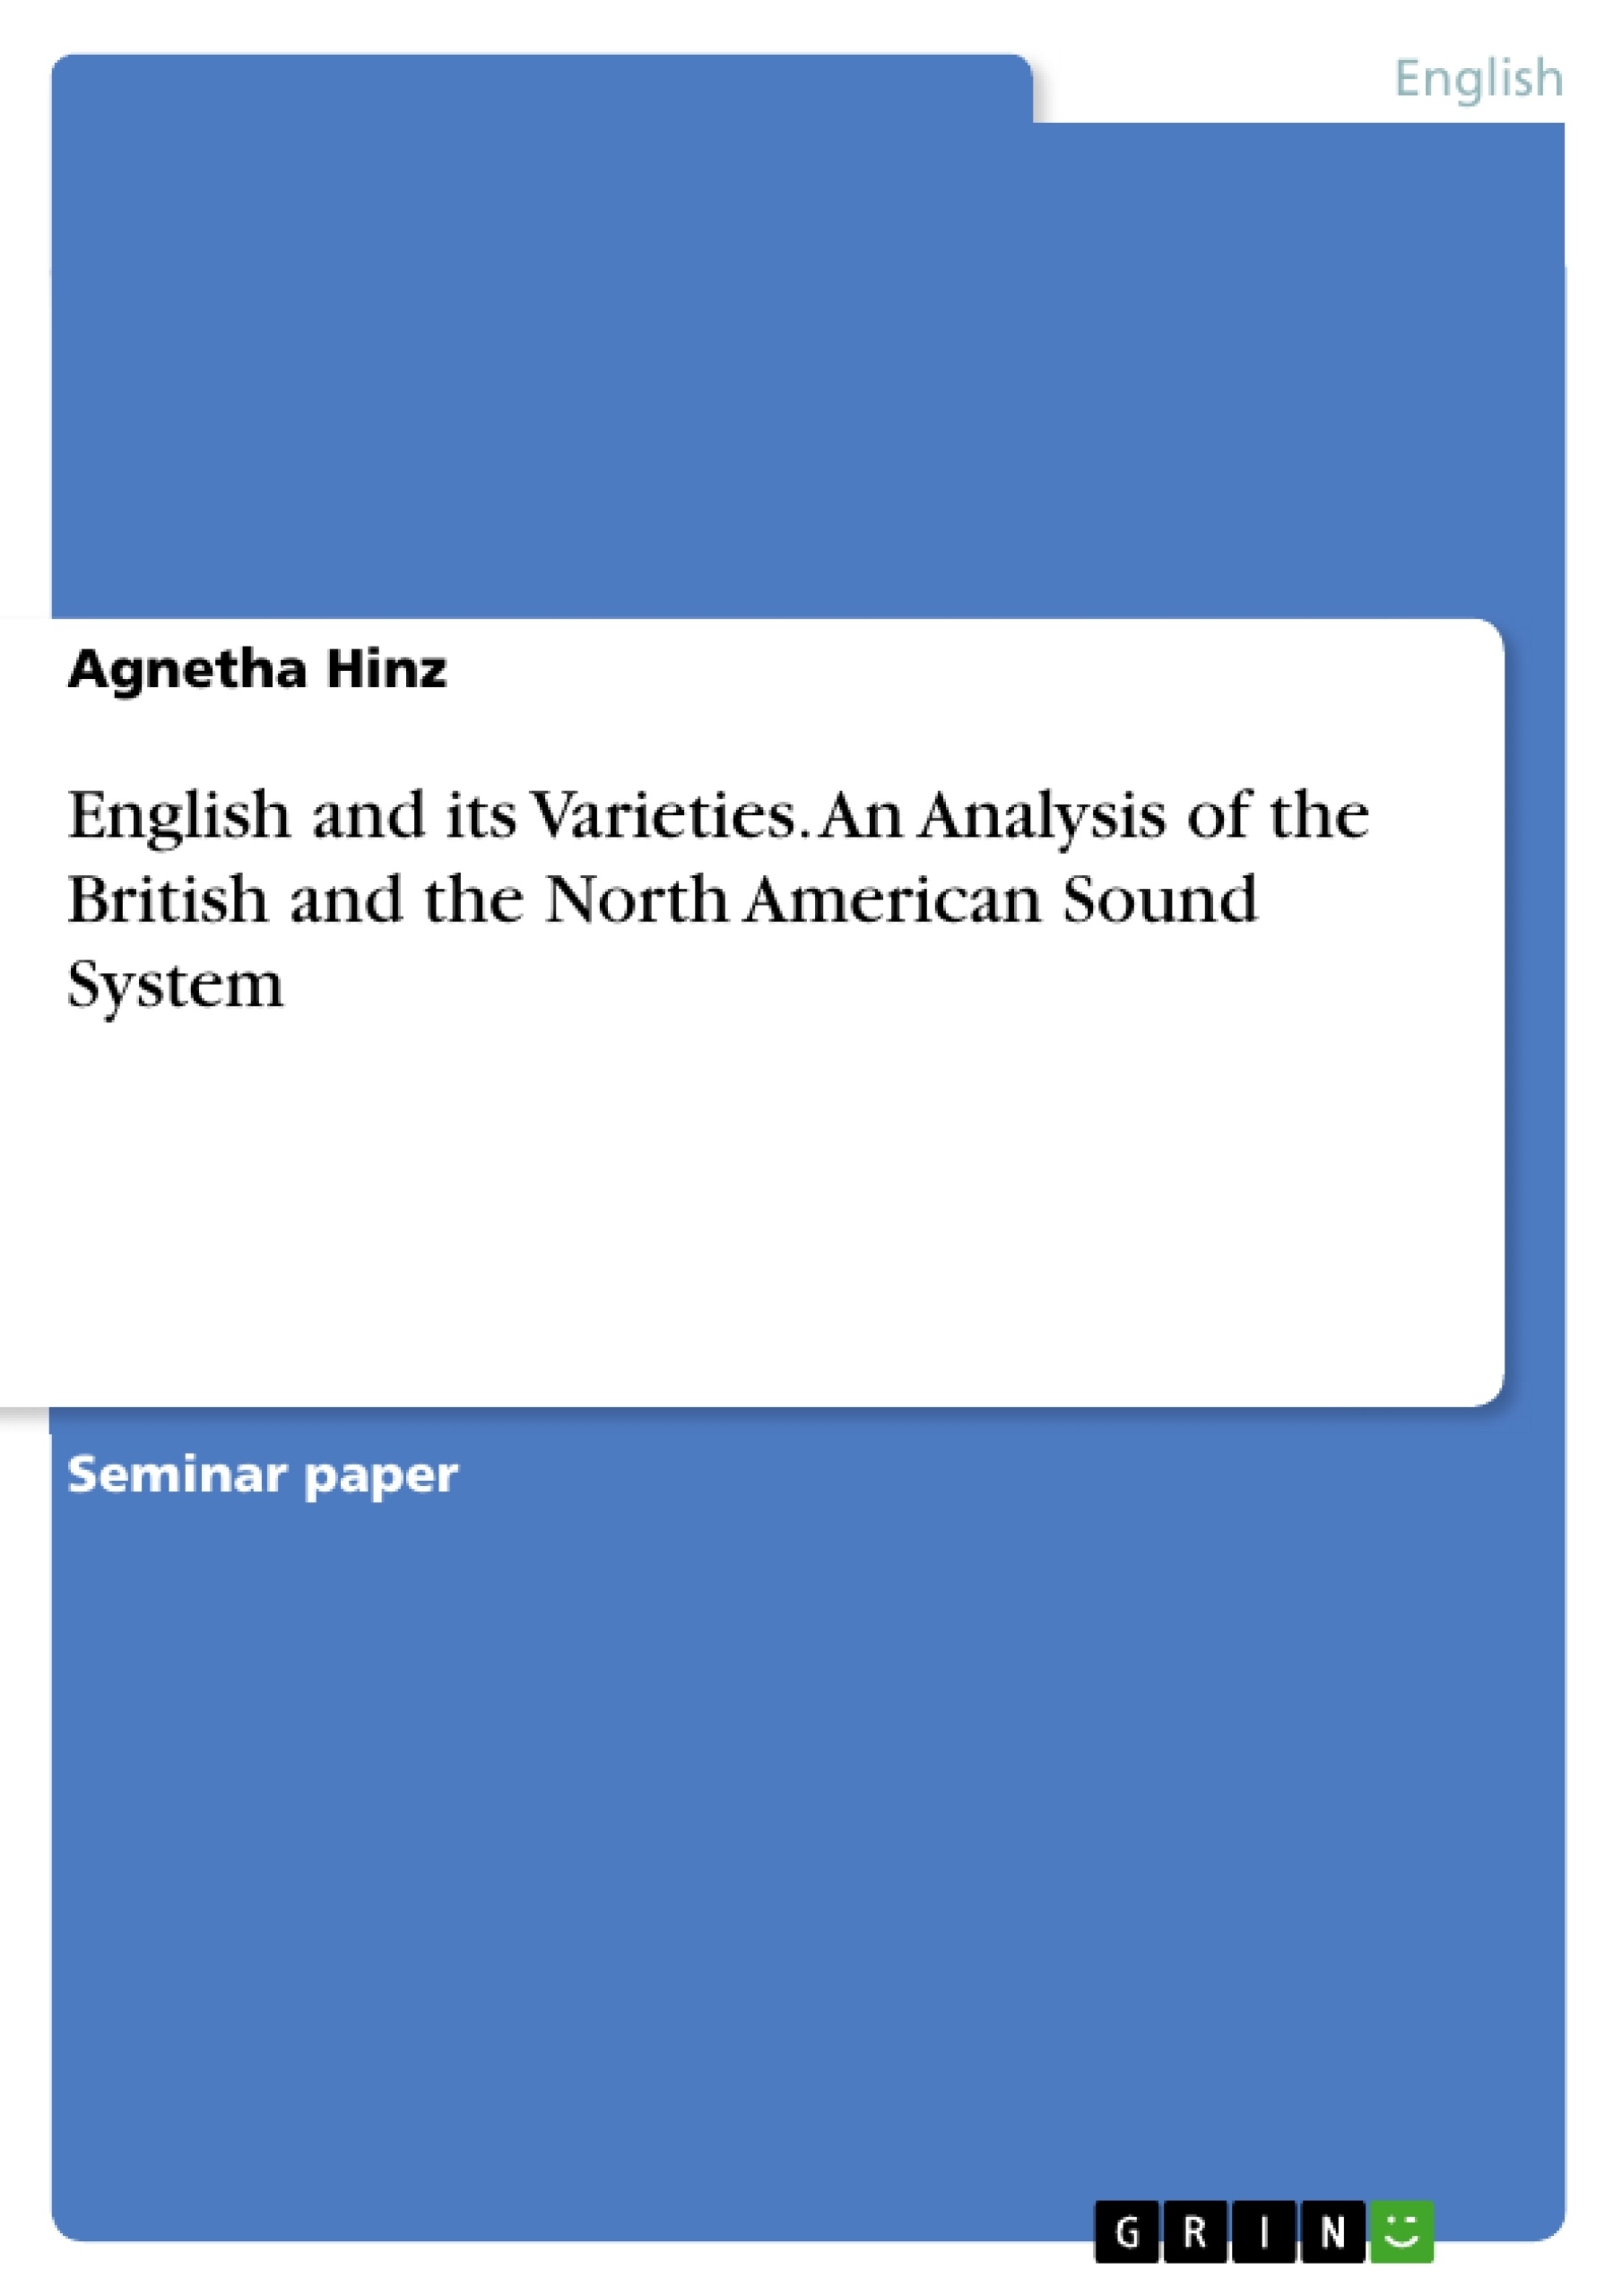 Title: English and its Varieties. An Analysis of the British and the North American Sound System